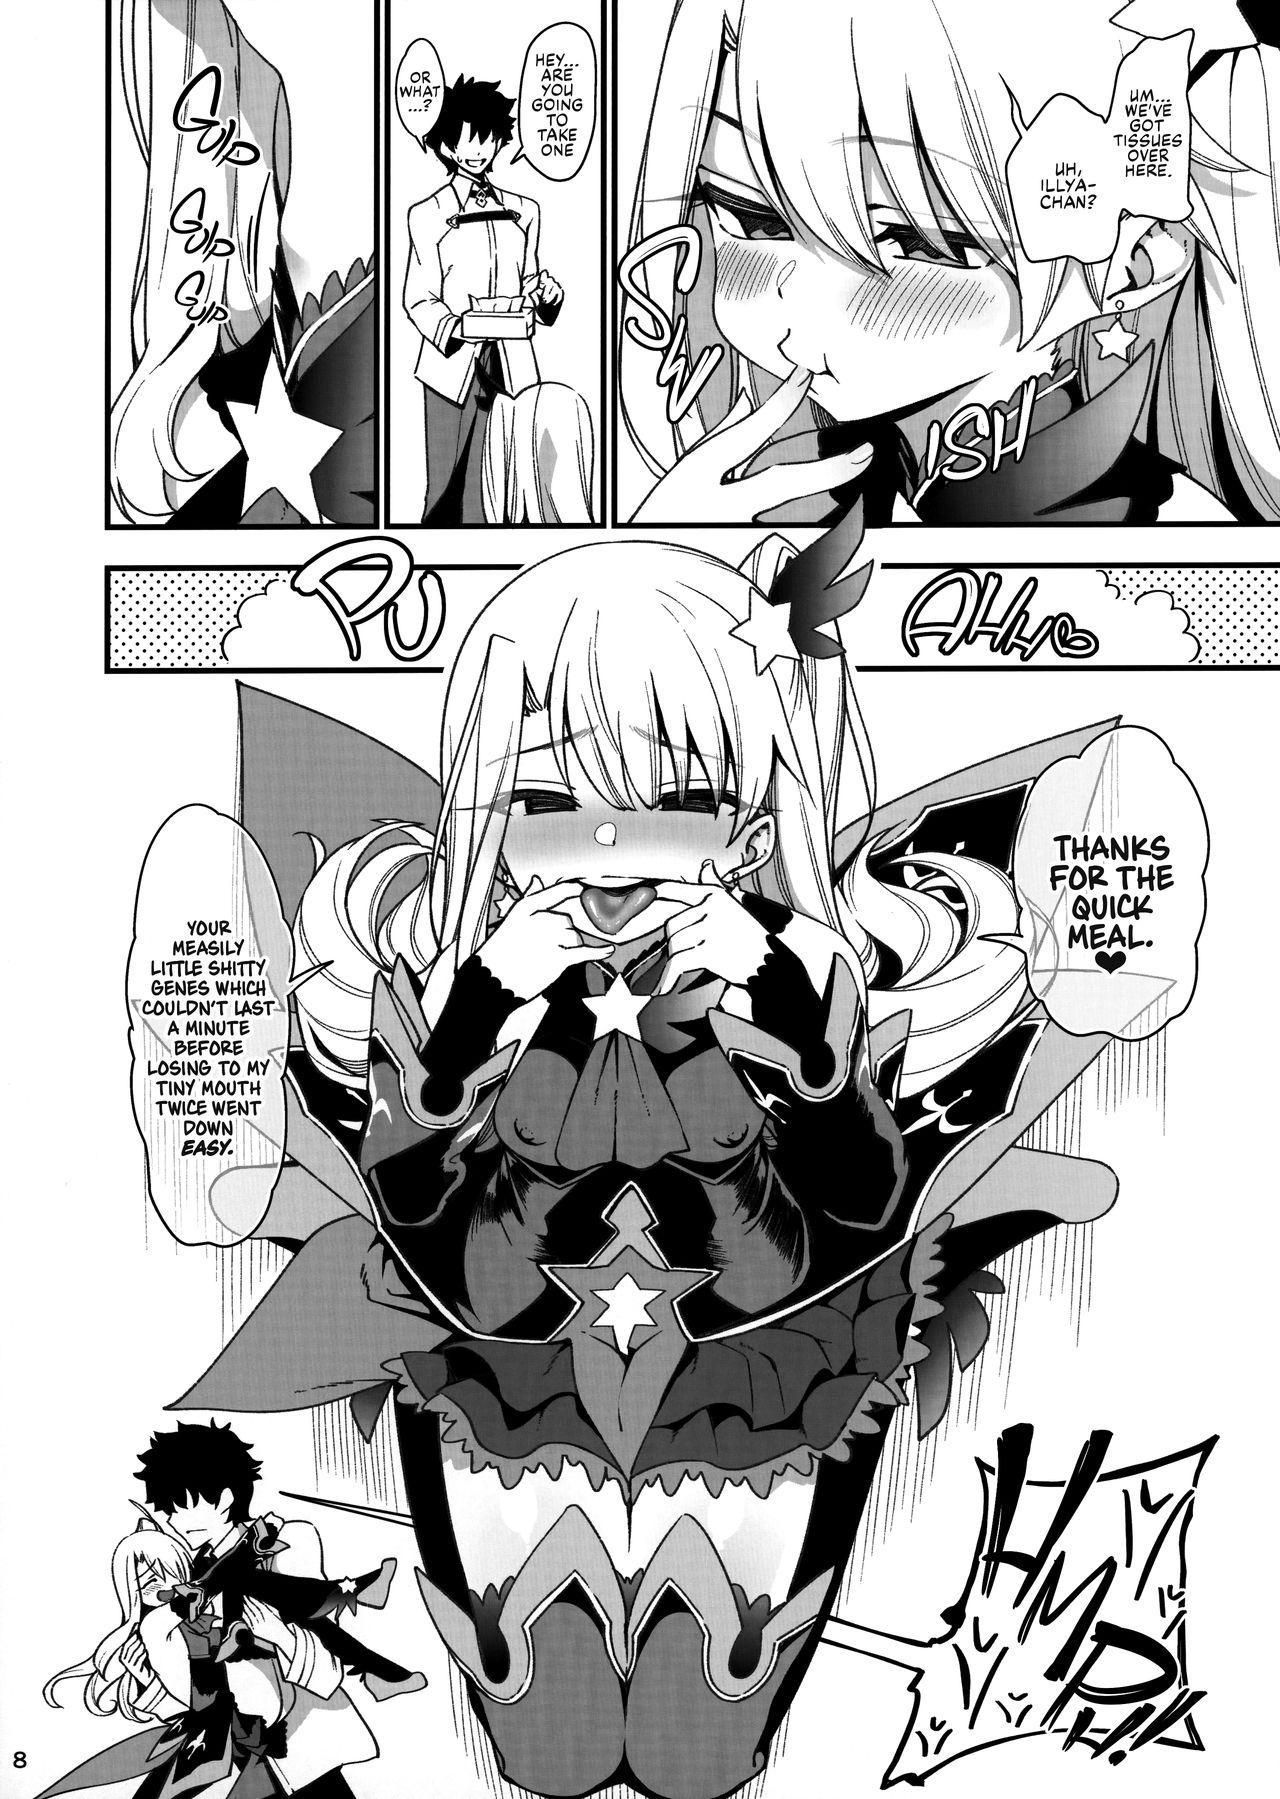 Polla Mesugaki Testament Form-chan o Wakarasetai | That Slutty Little Testament Form Brat! I Want to Teach Her a Lesson! - Fate grand order Outdoor - Page 9